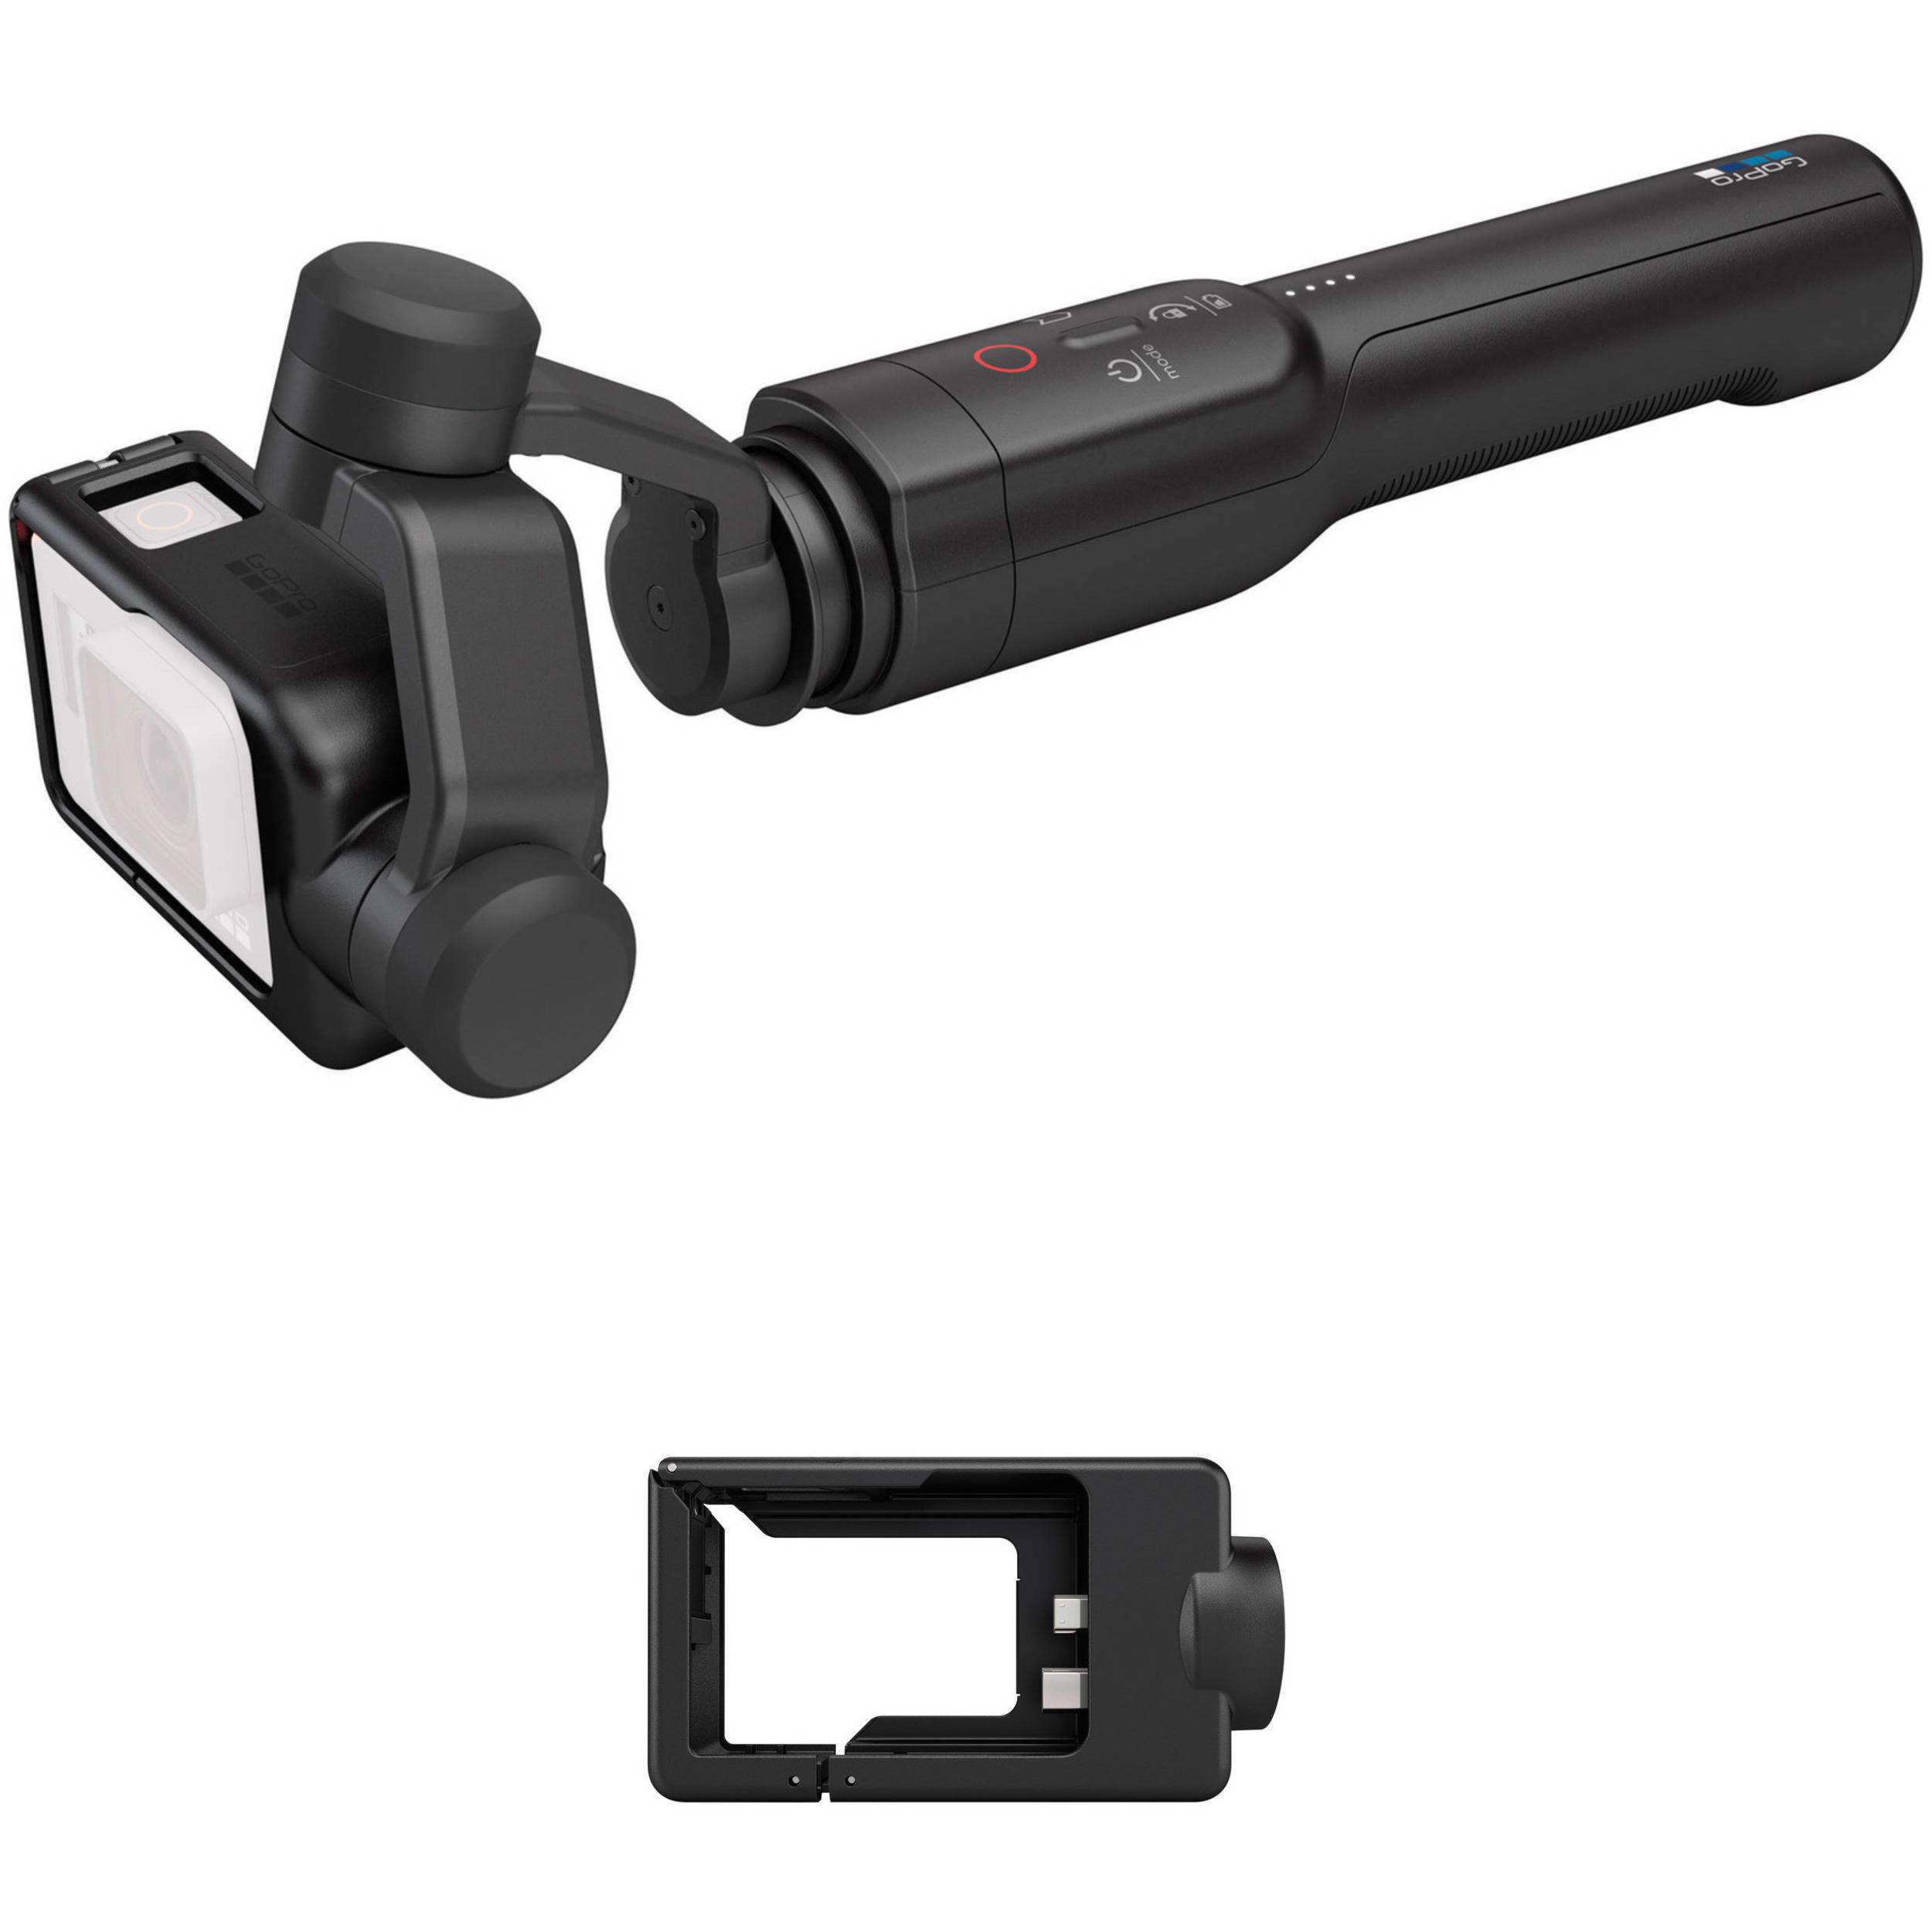 GoPro Karma Grip battery charger